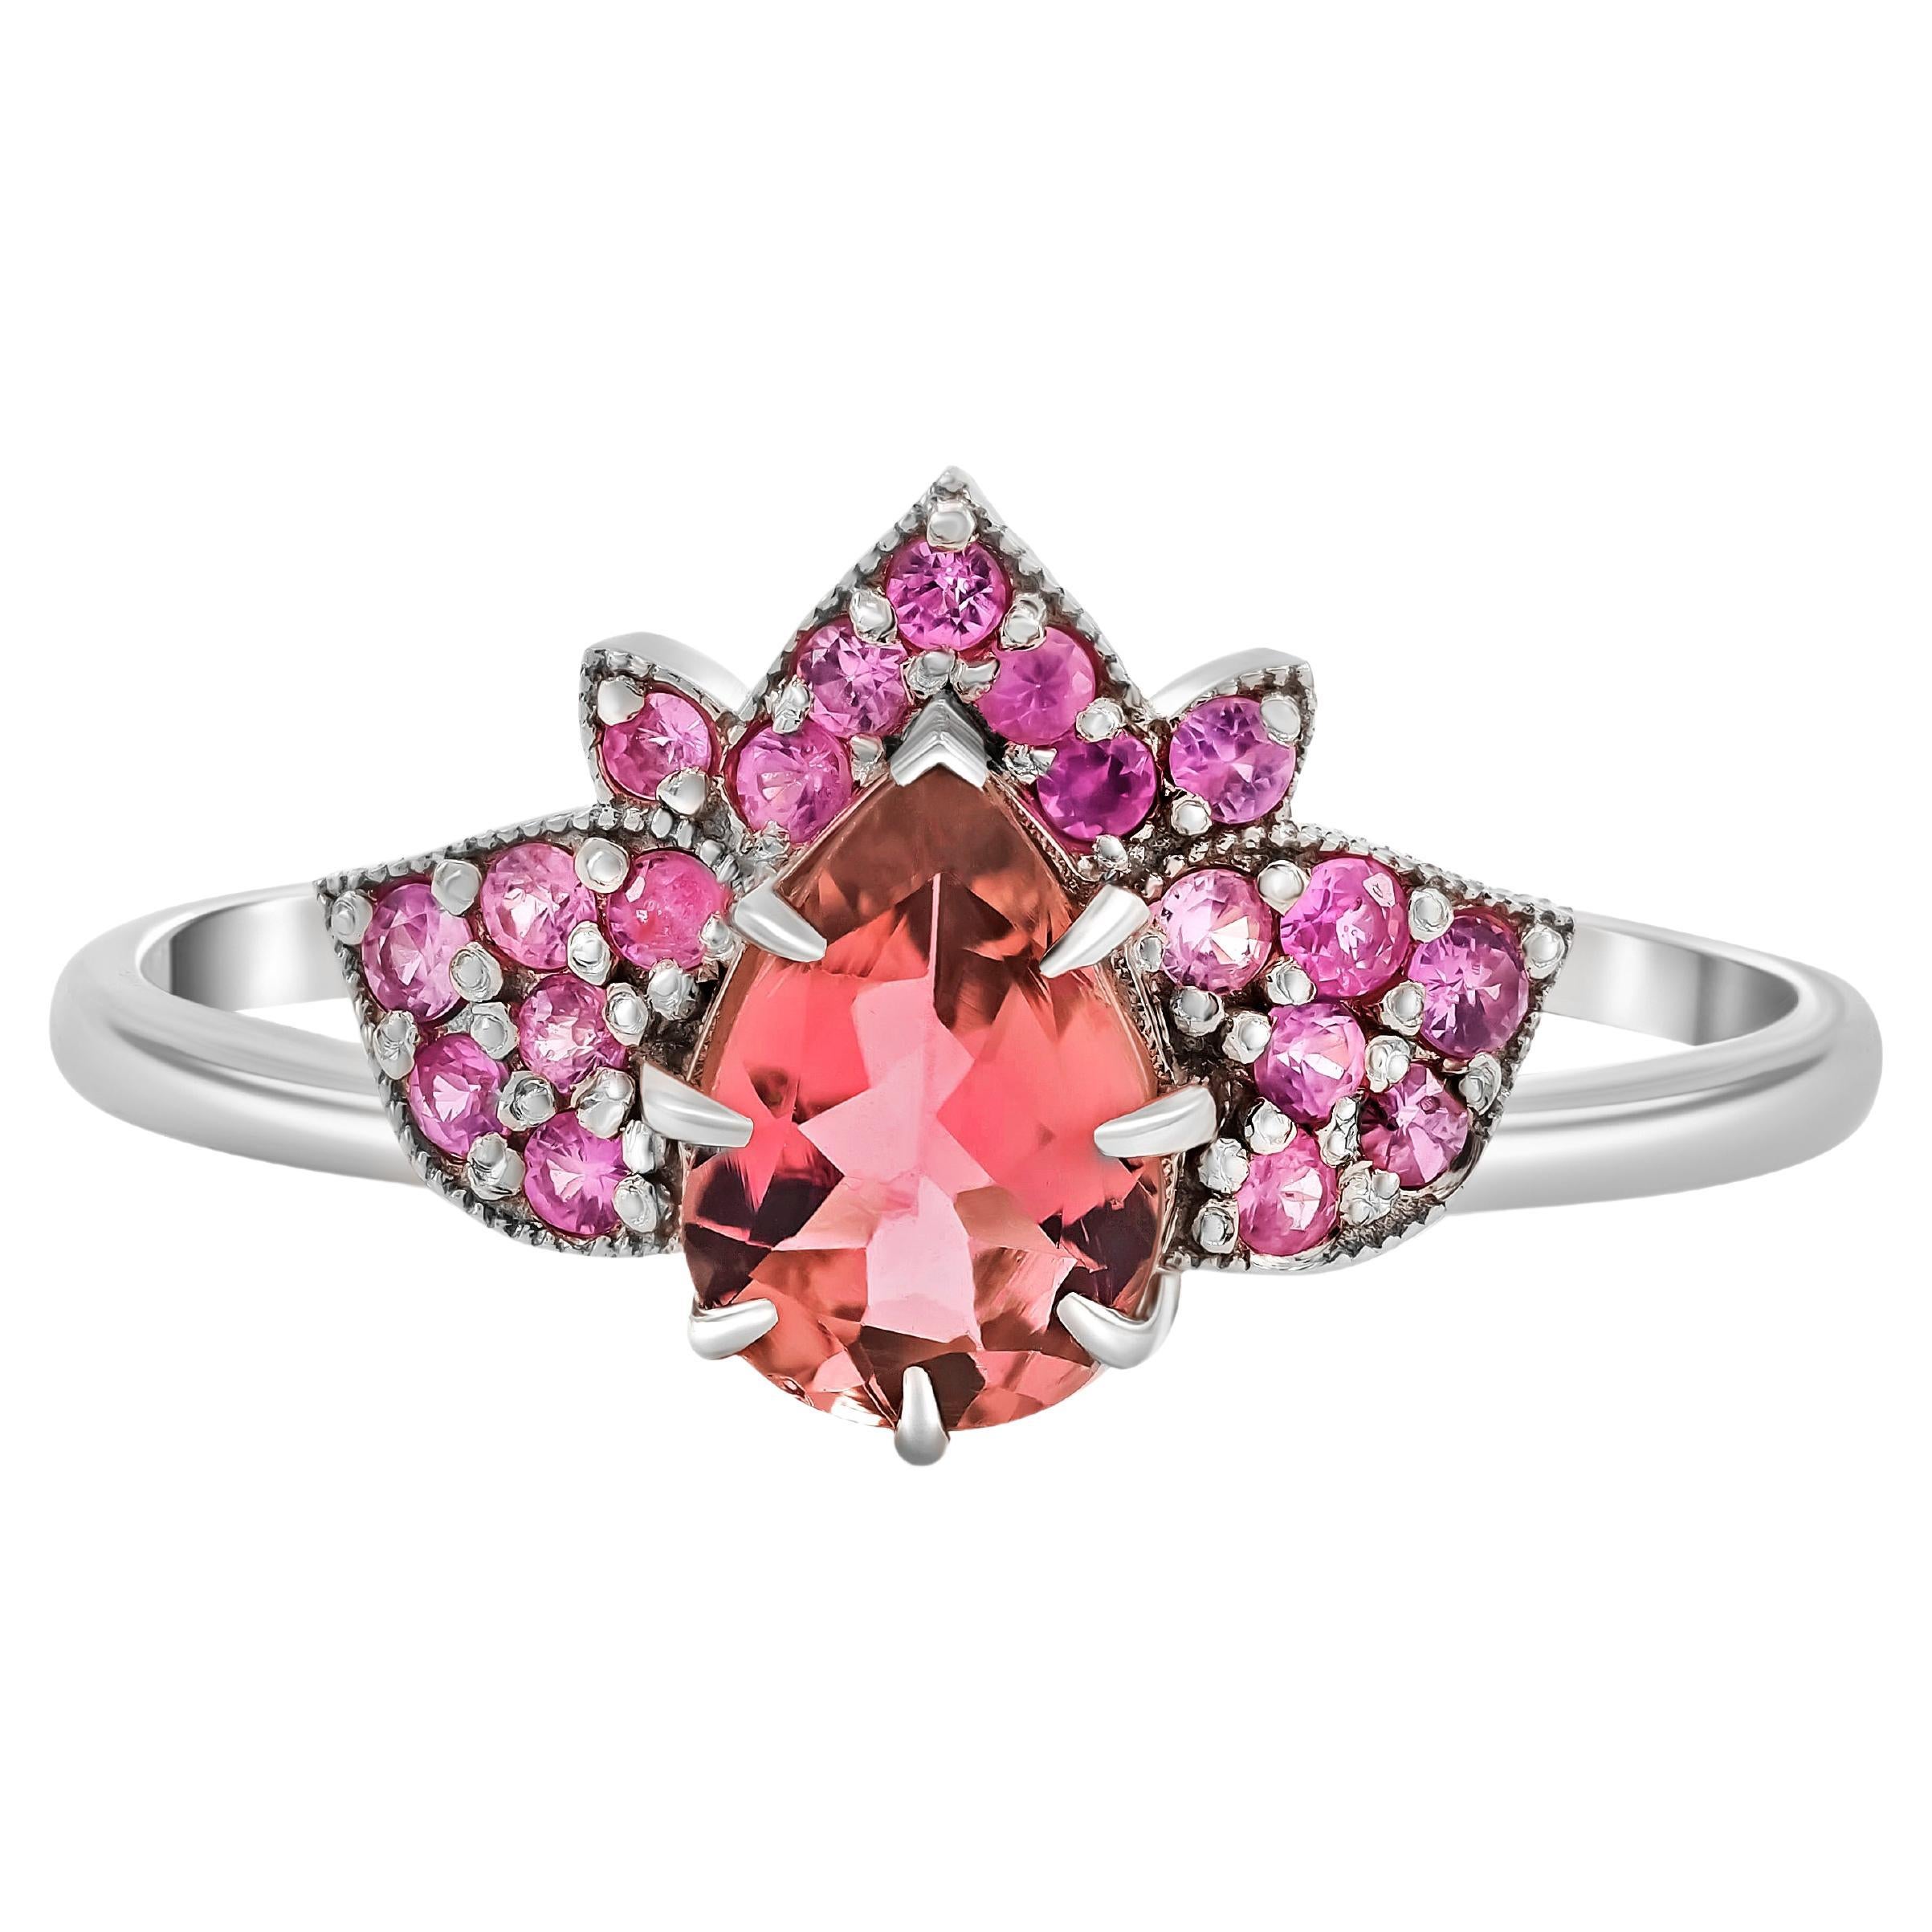 For Sale:  14 karat gold Lotus ring with pink tourmaline and sapphires